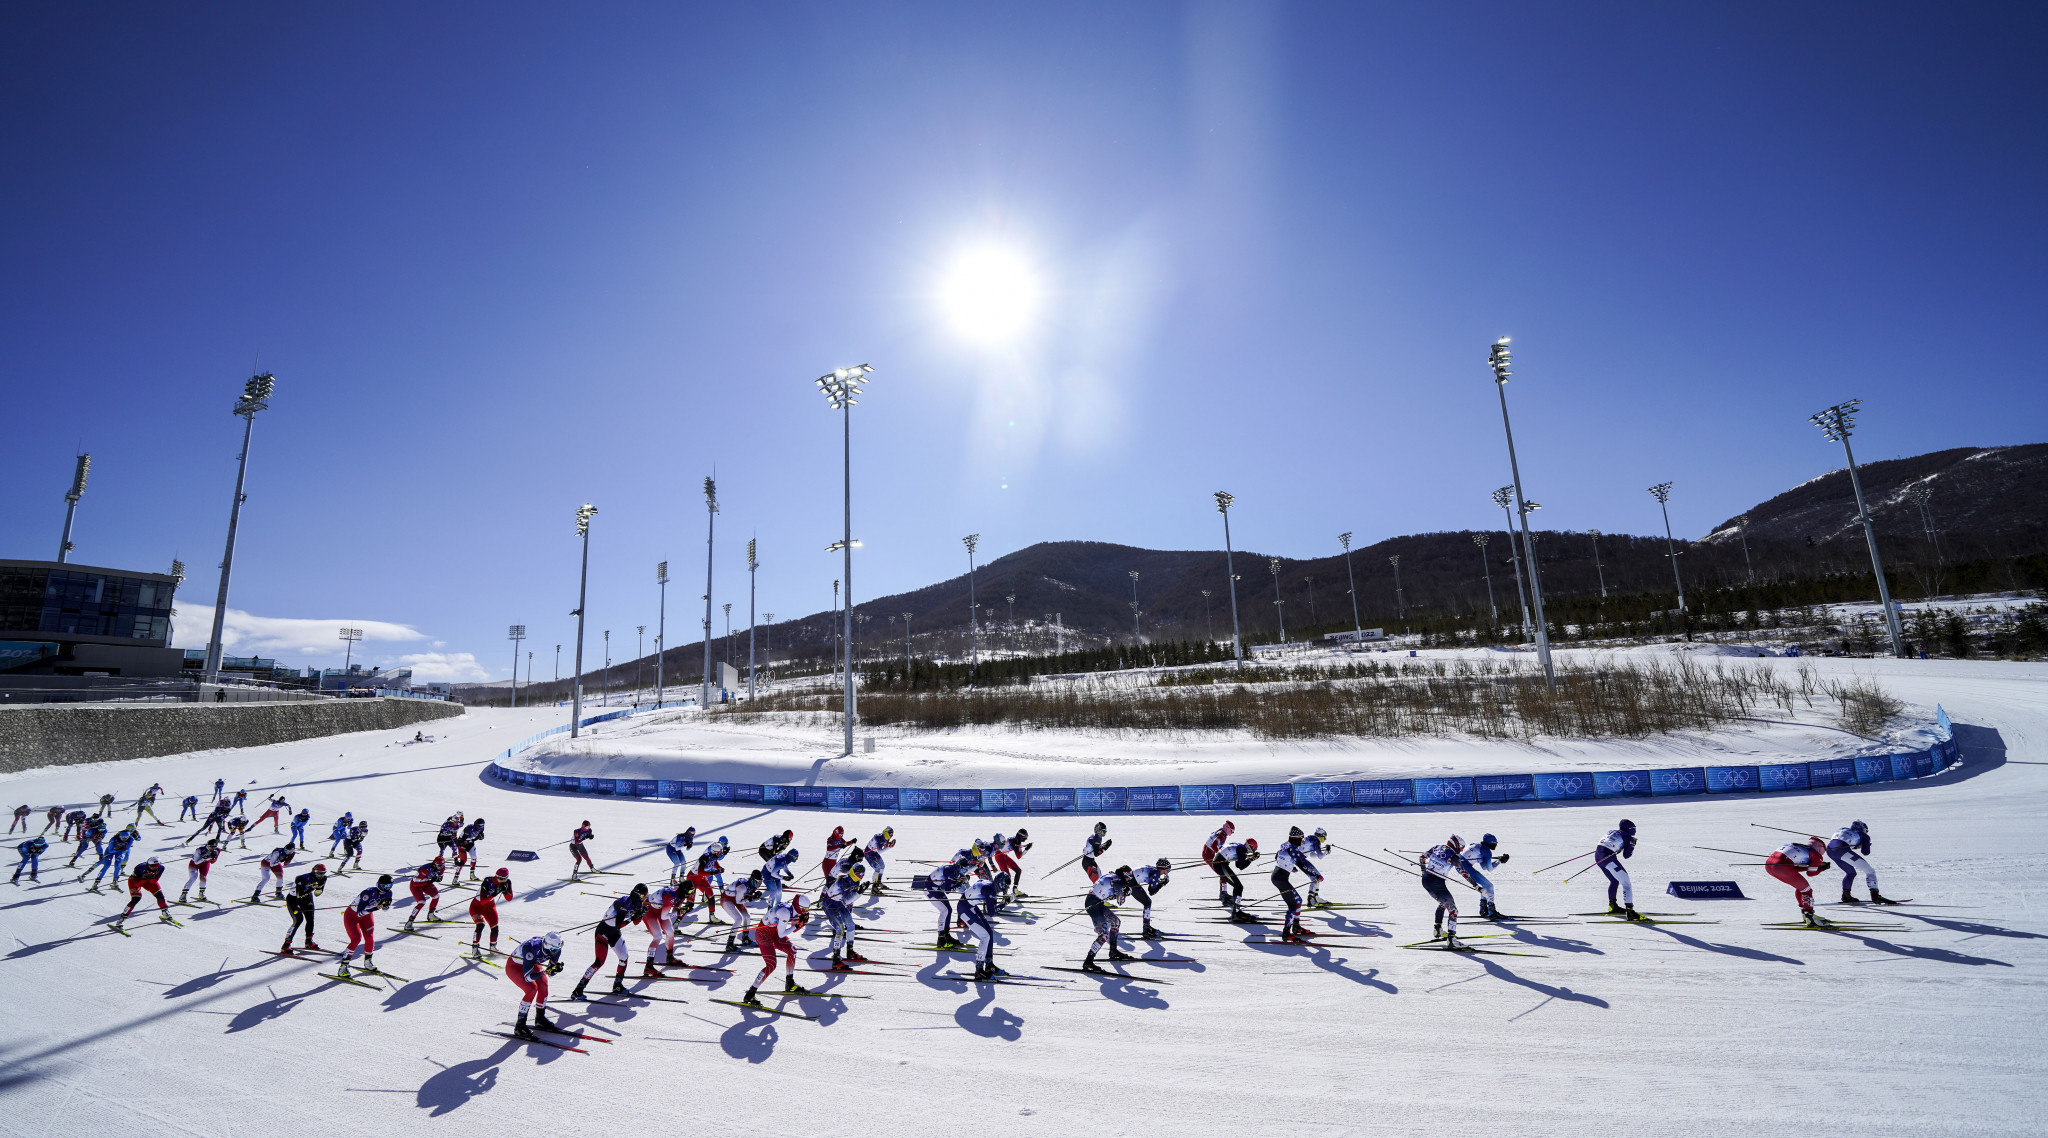 Energy-saving reduction of 5km competition loop approved by FIS Cross-Country Committee